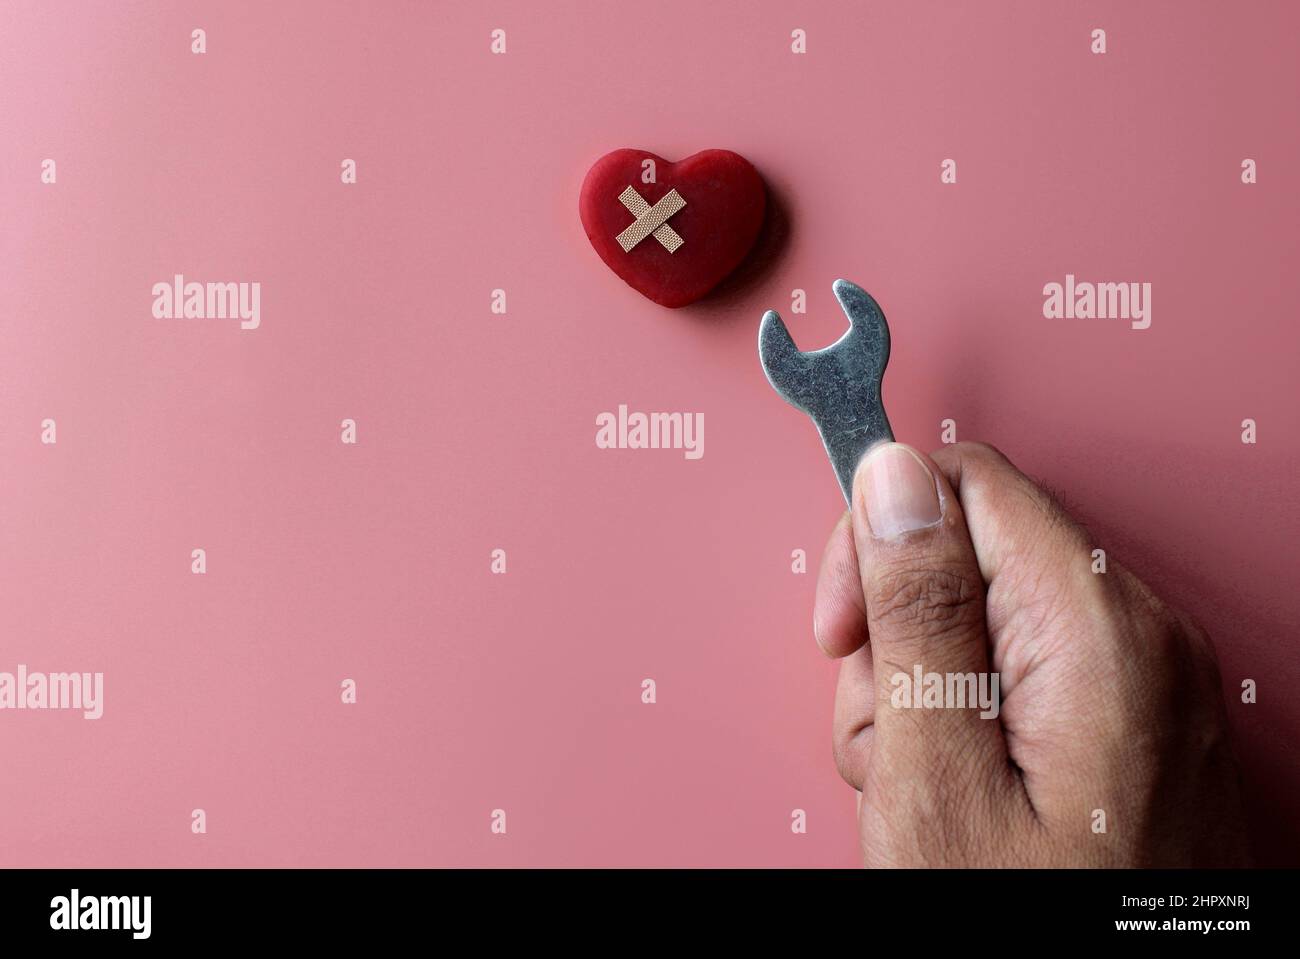 Fix, mend a broken heart concept. Red heart, bandage and spanner on pink background with copy space. Stock Photo